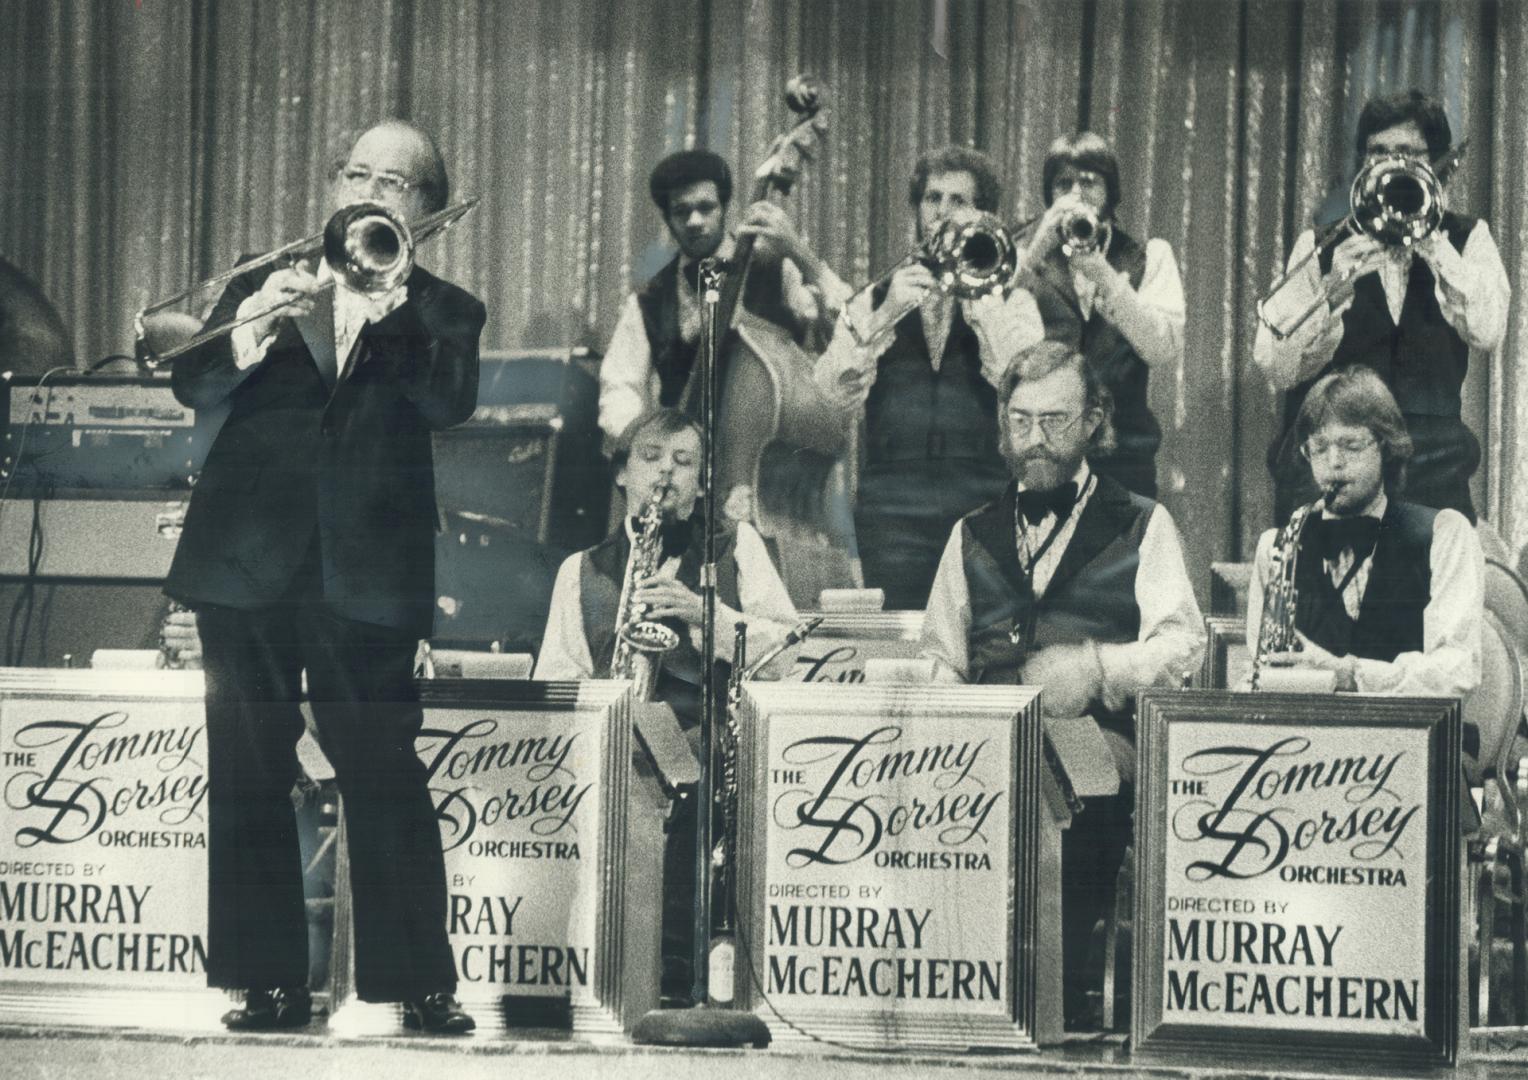 The Tommy Dorsey Band Led By Former Toronto Trombonist Murray Mceachern Put On A Combination